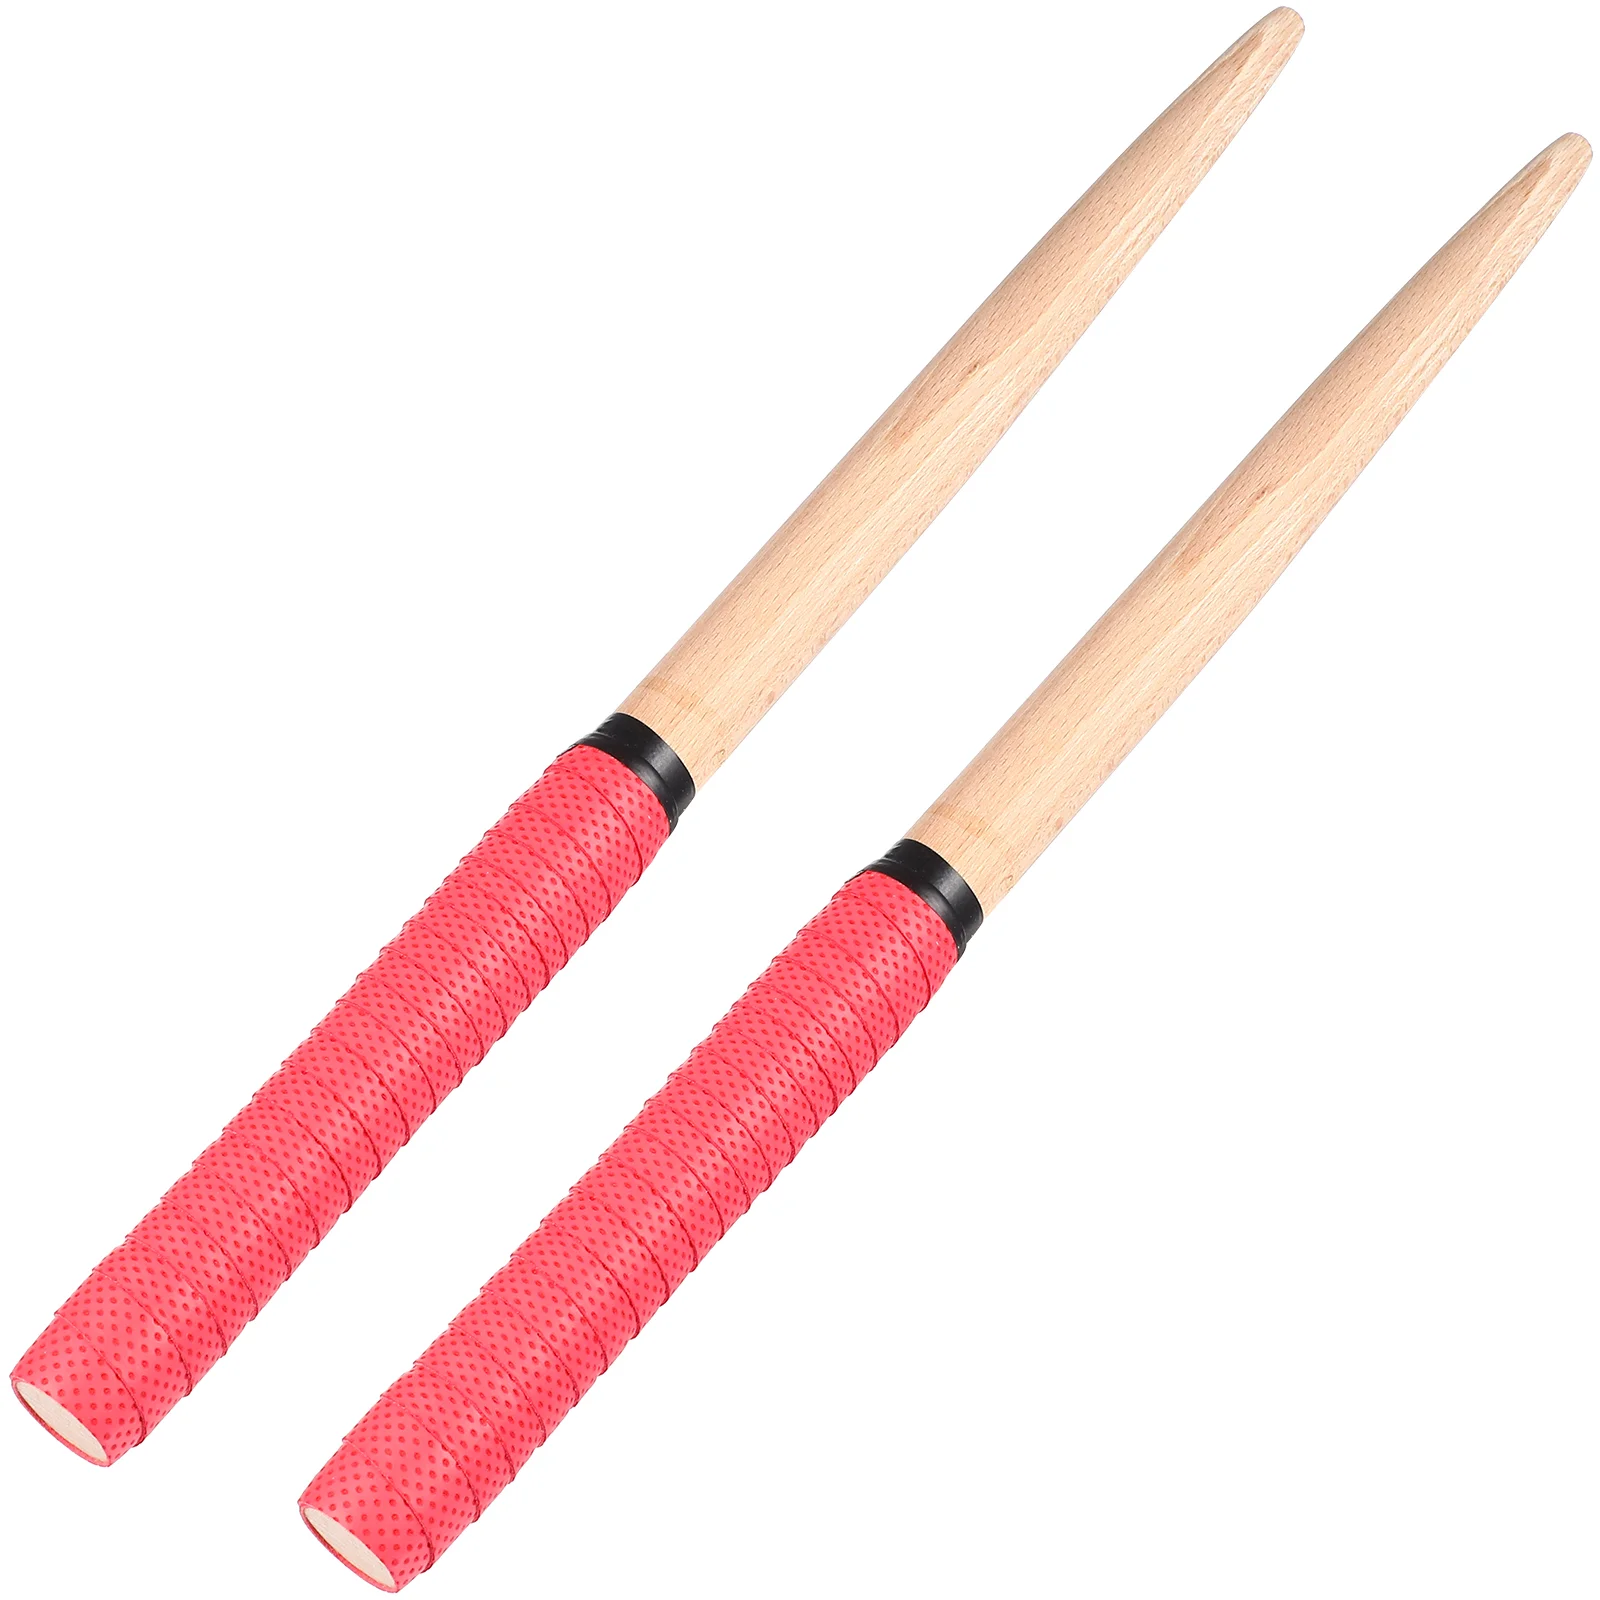 Professional Percussion Sticks Maibachi Wood Drumsticks Pair for Musical Instruments enlarge